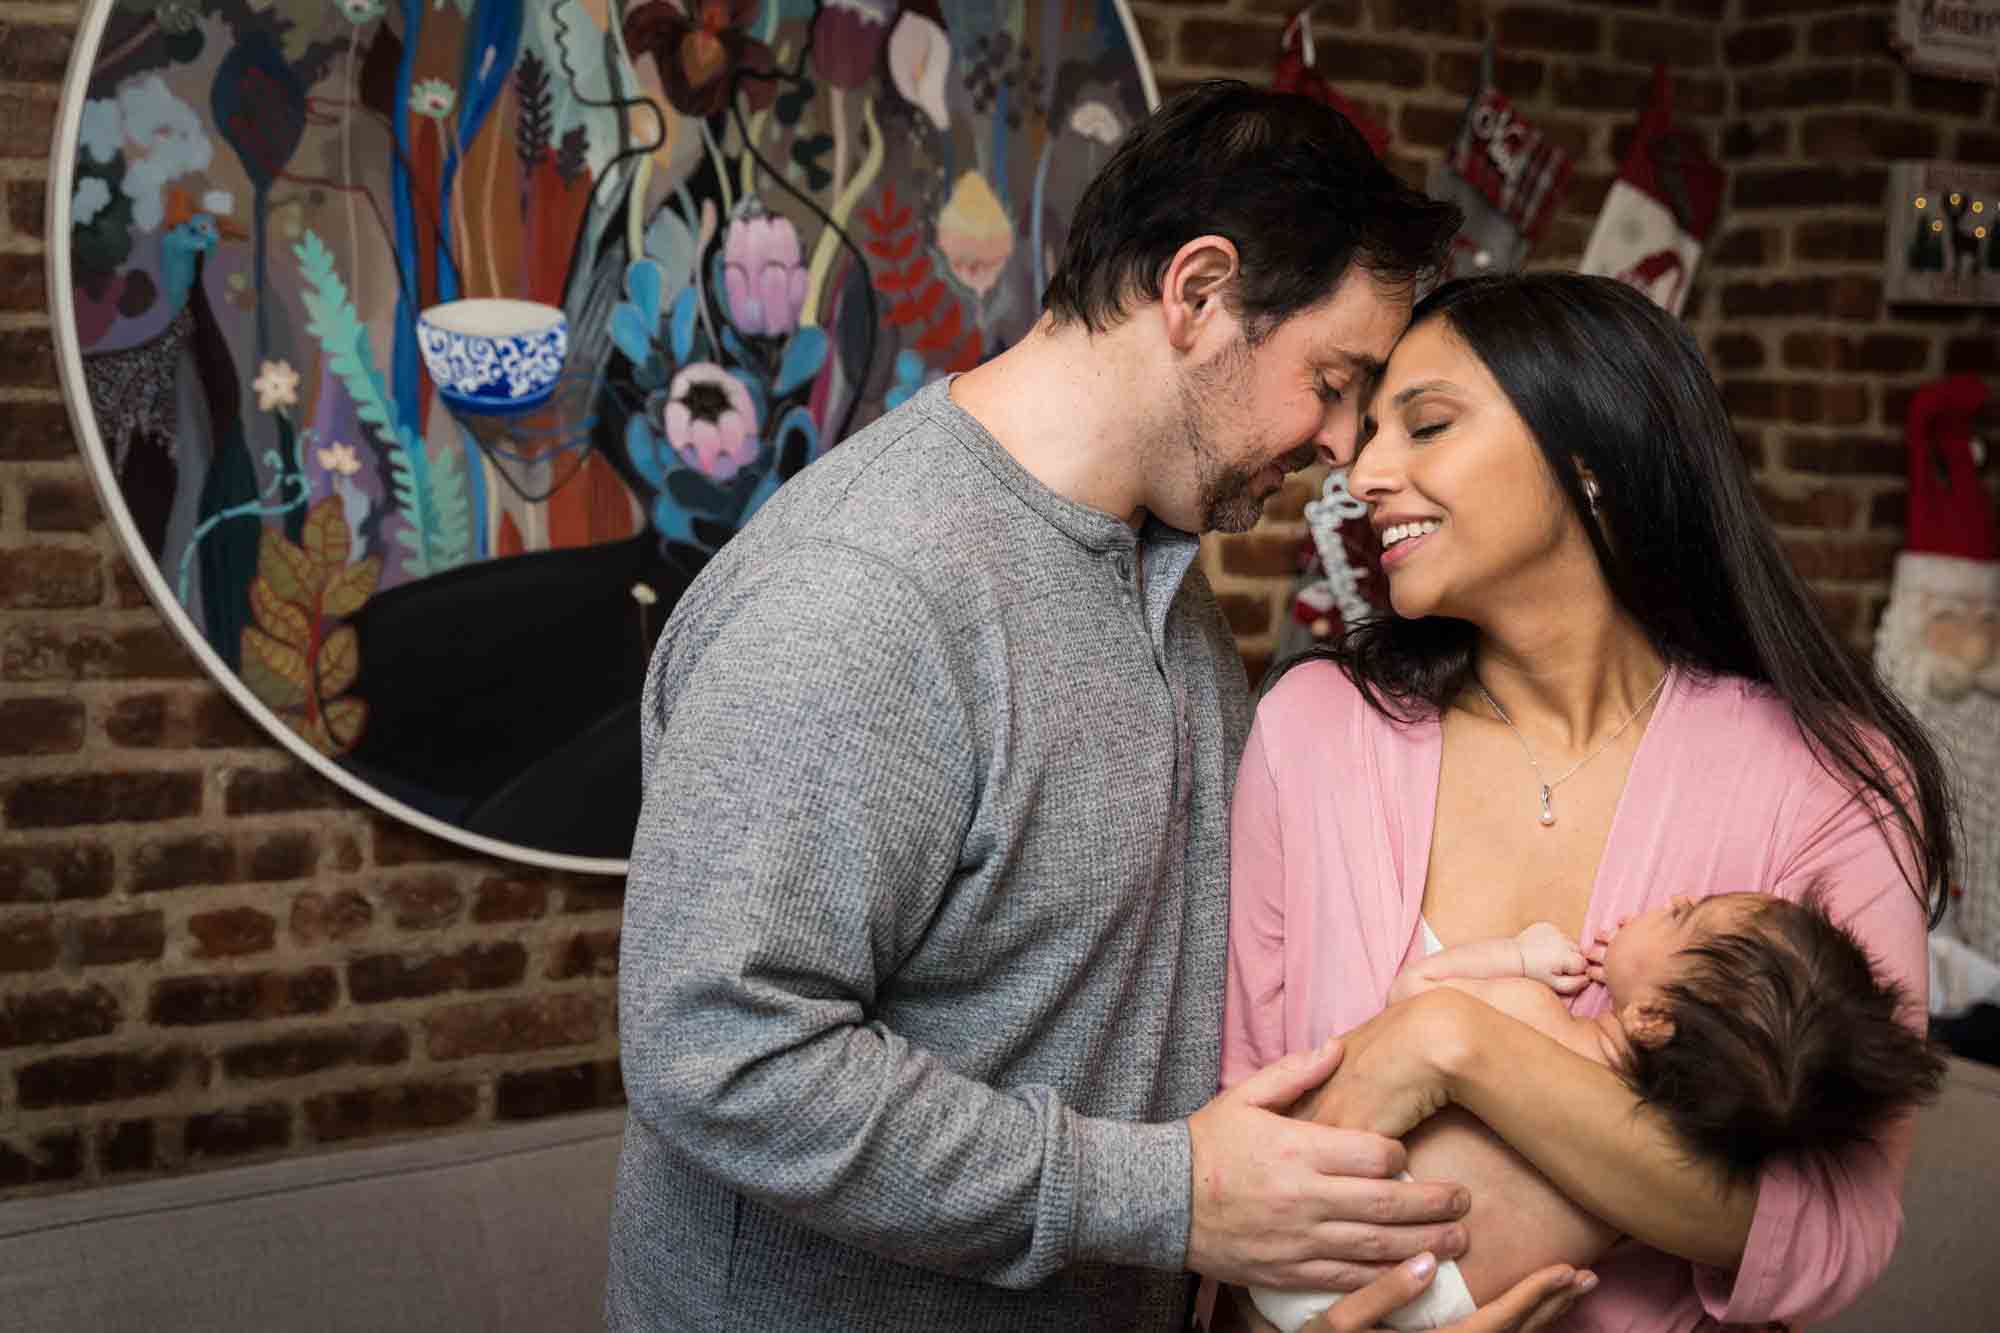 Parents touching foreheads while holding newborn baby in front of brick wall